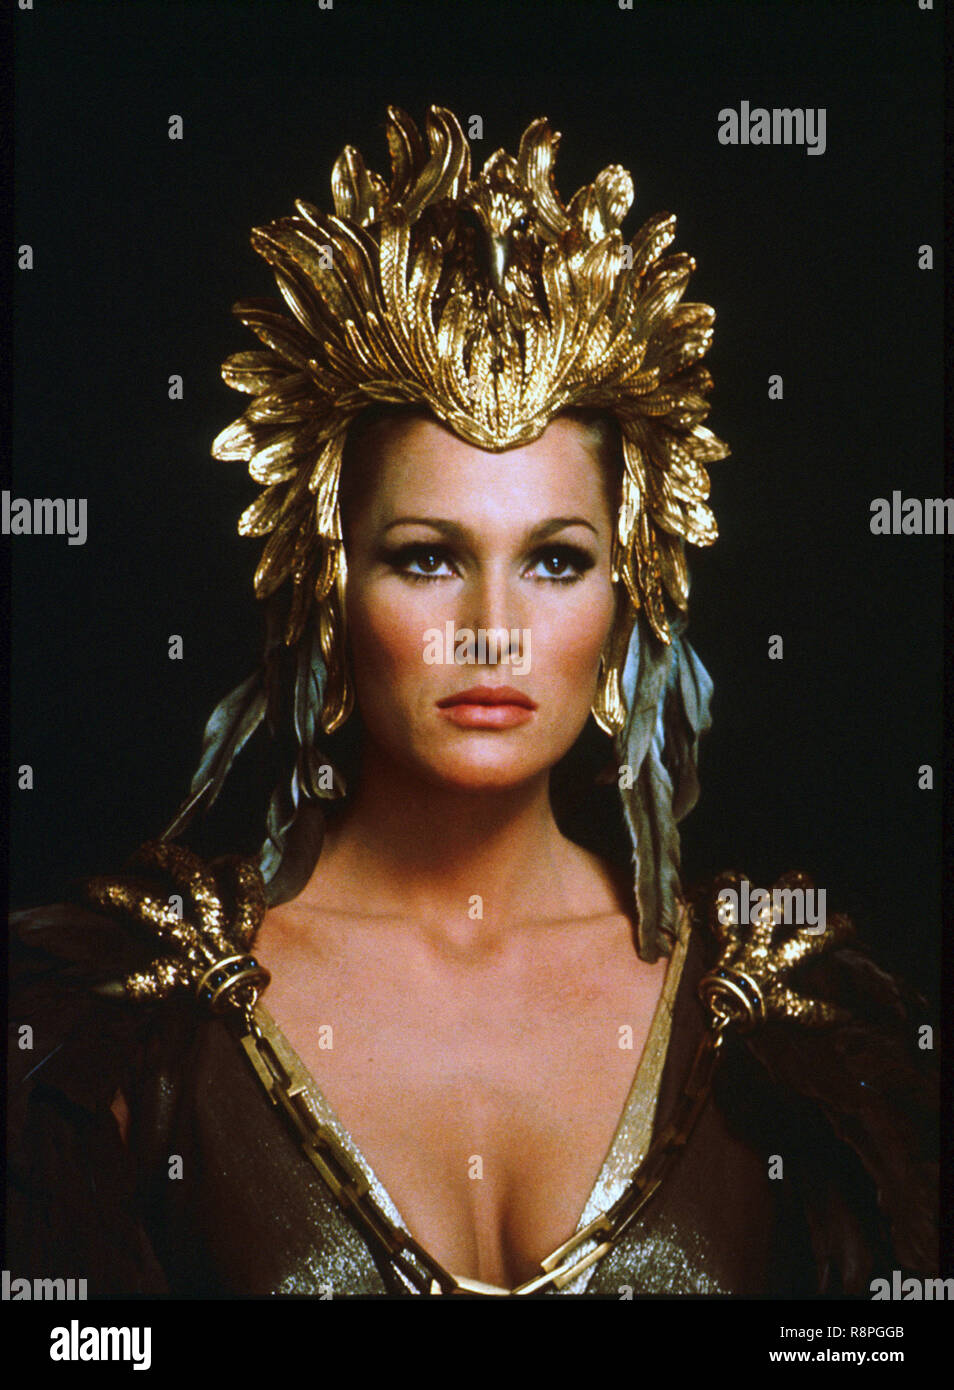 Ursula Andress,  'She' (1965) Hammer Films  File Reference # 33635 545THA Stock Photo